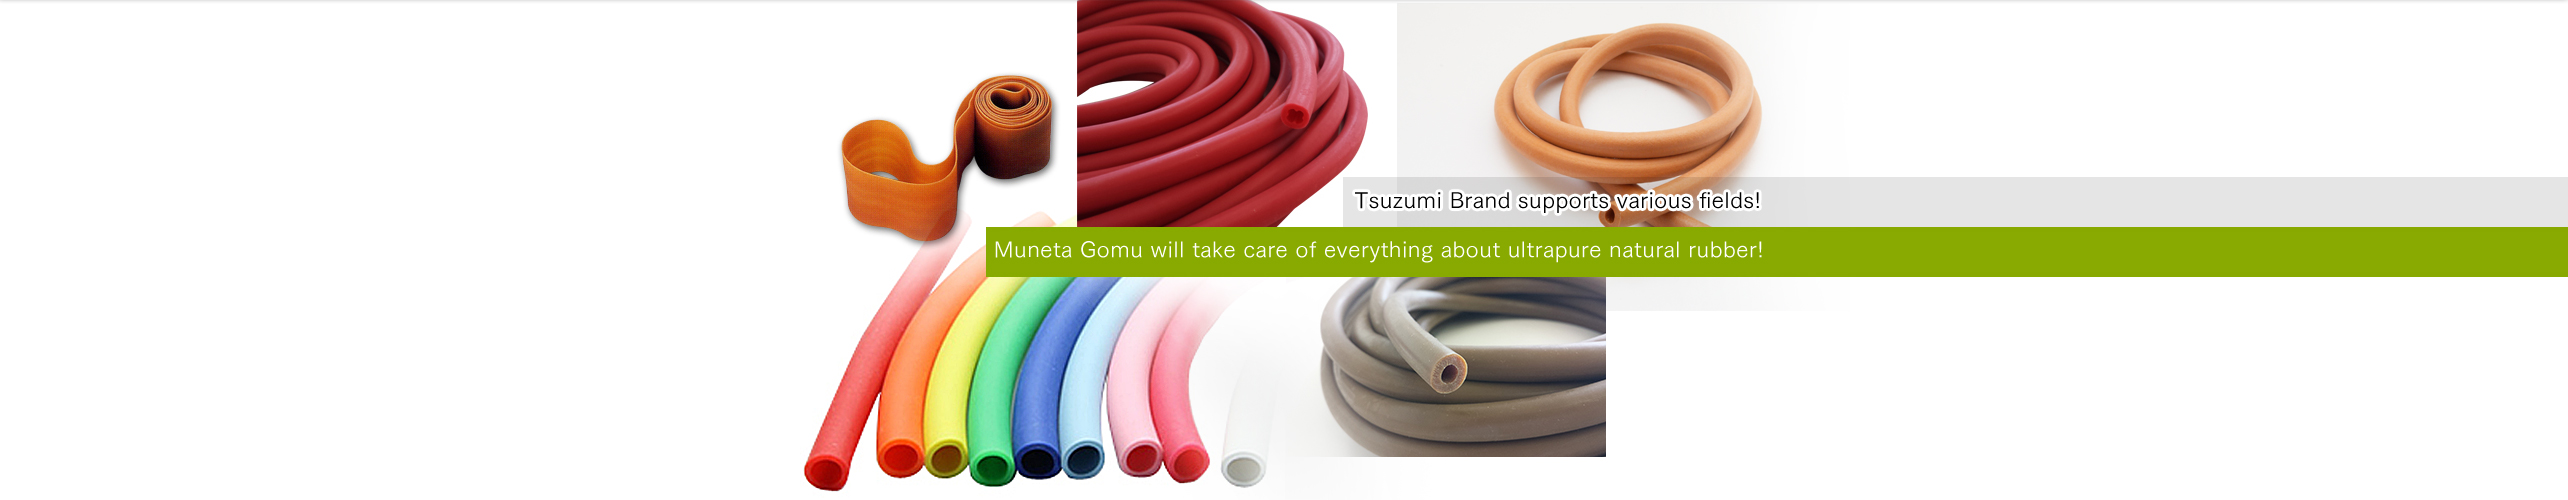 Tsuzumi Brand supports various fields! Muneta Gomu will take care of everything about ultrapure natural rubber!